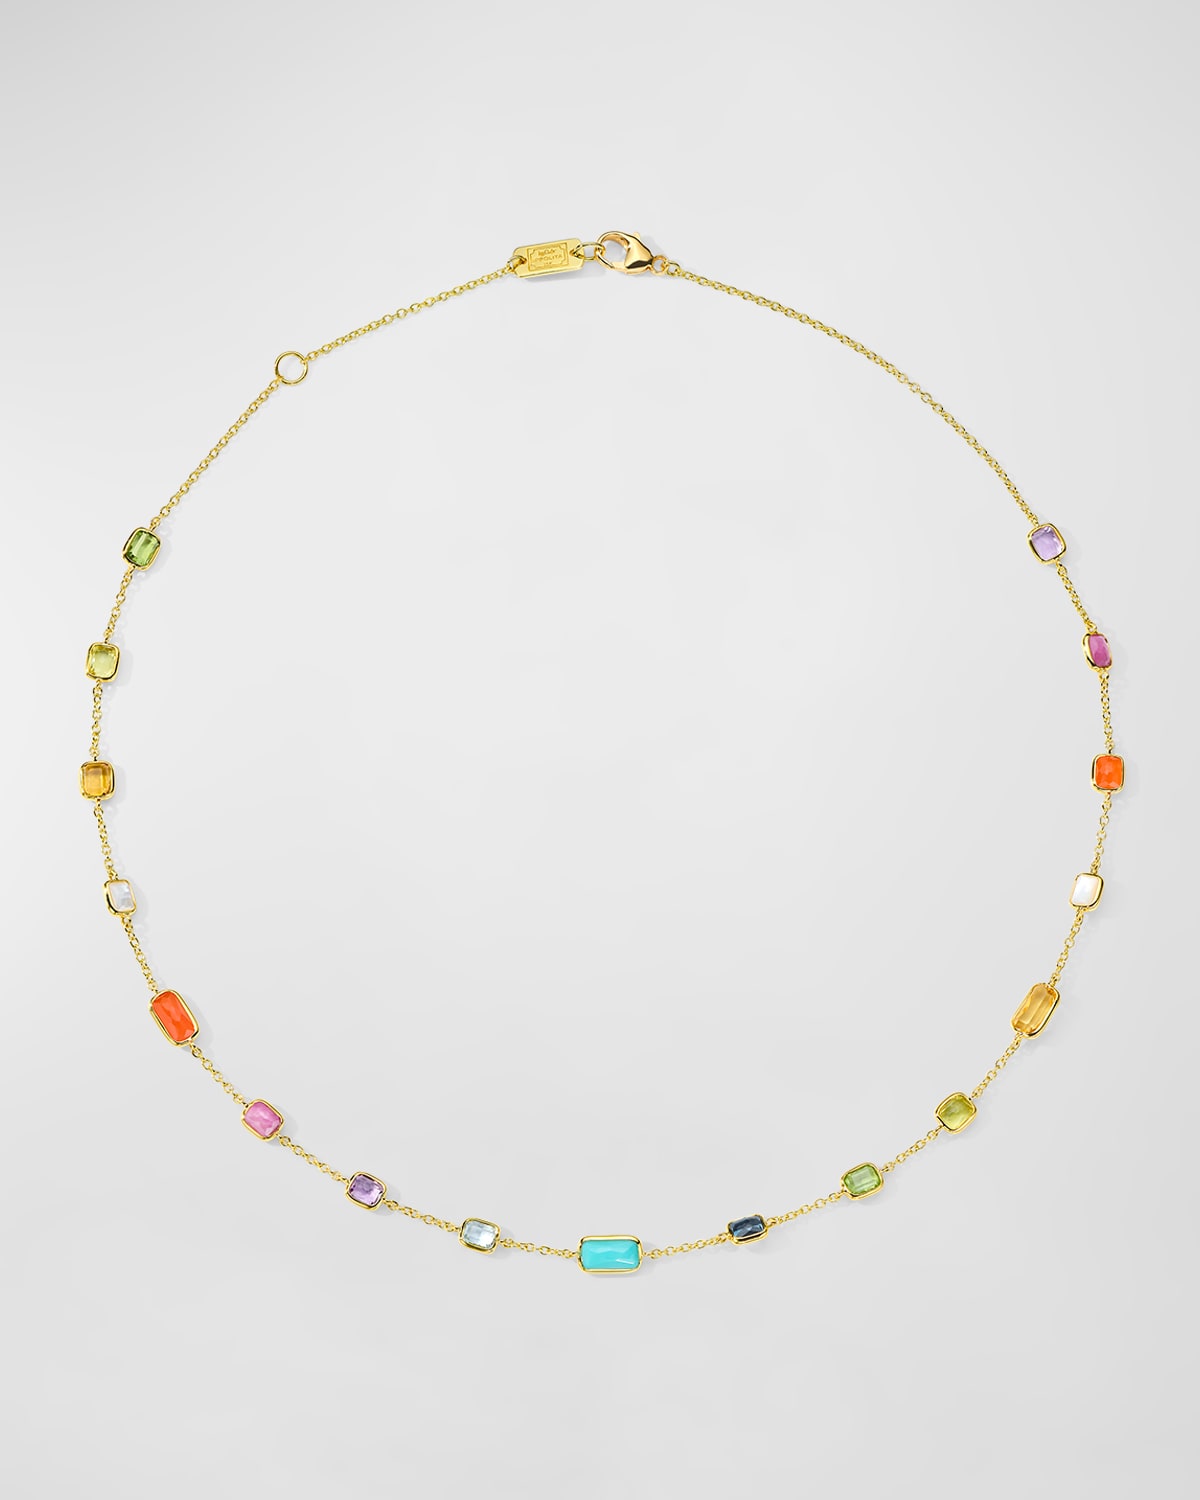 18K Rock Candy Octagon Long Necklace in Summer Rainbow 2, 16-18"L